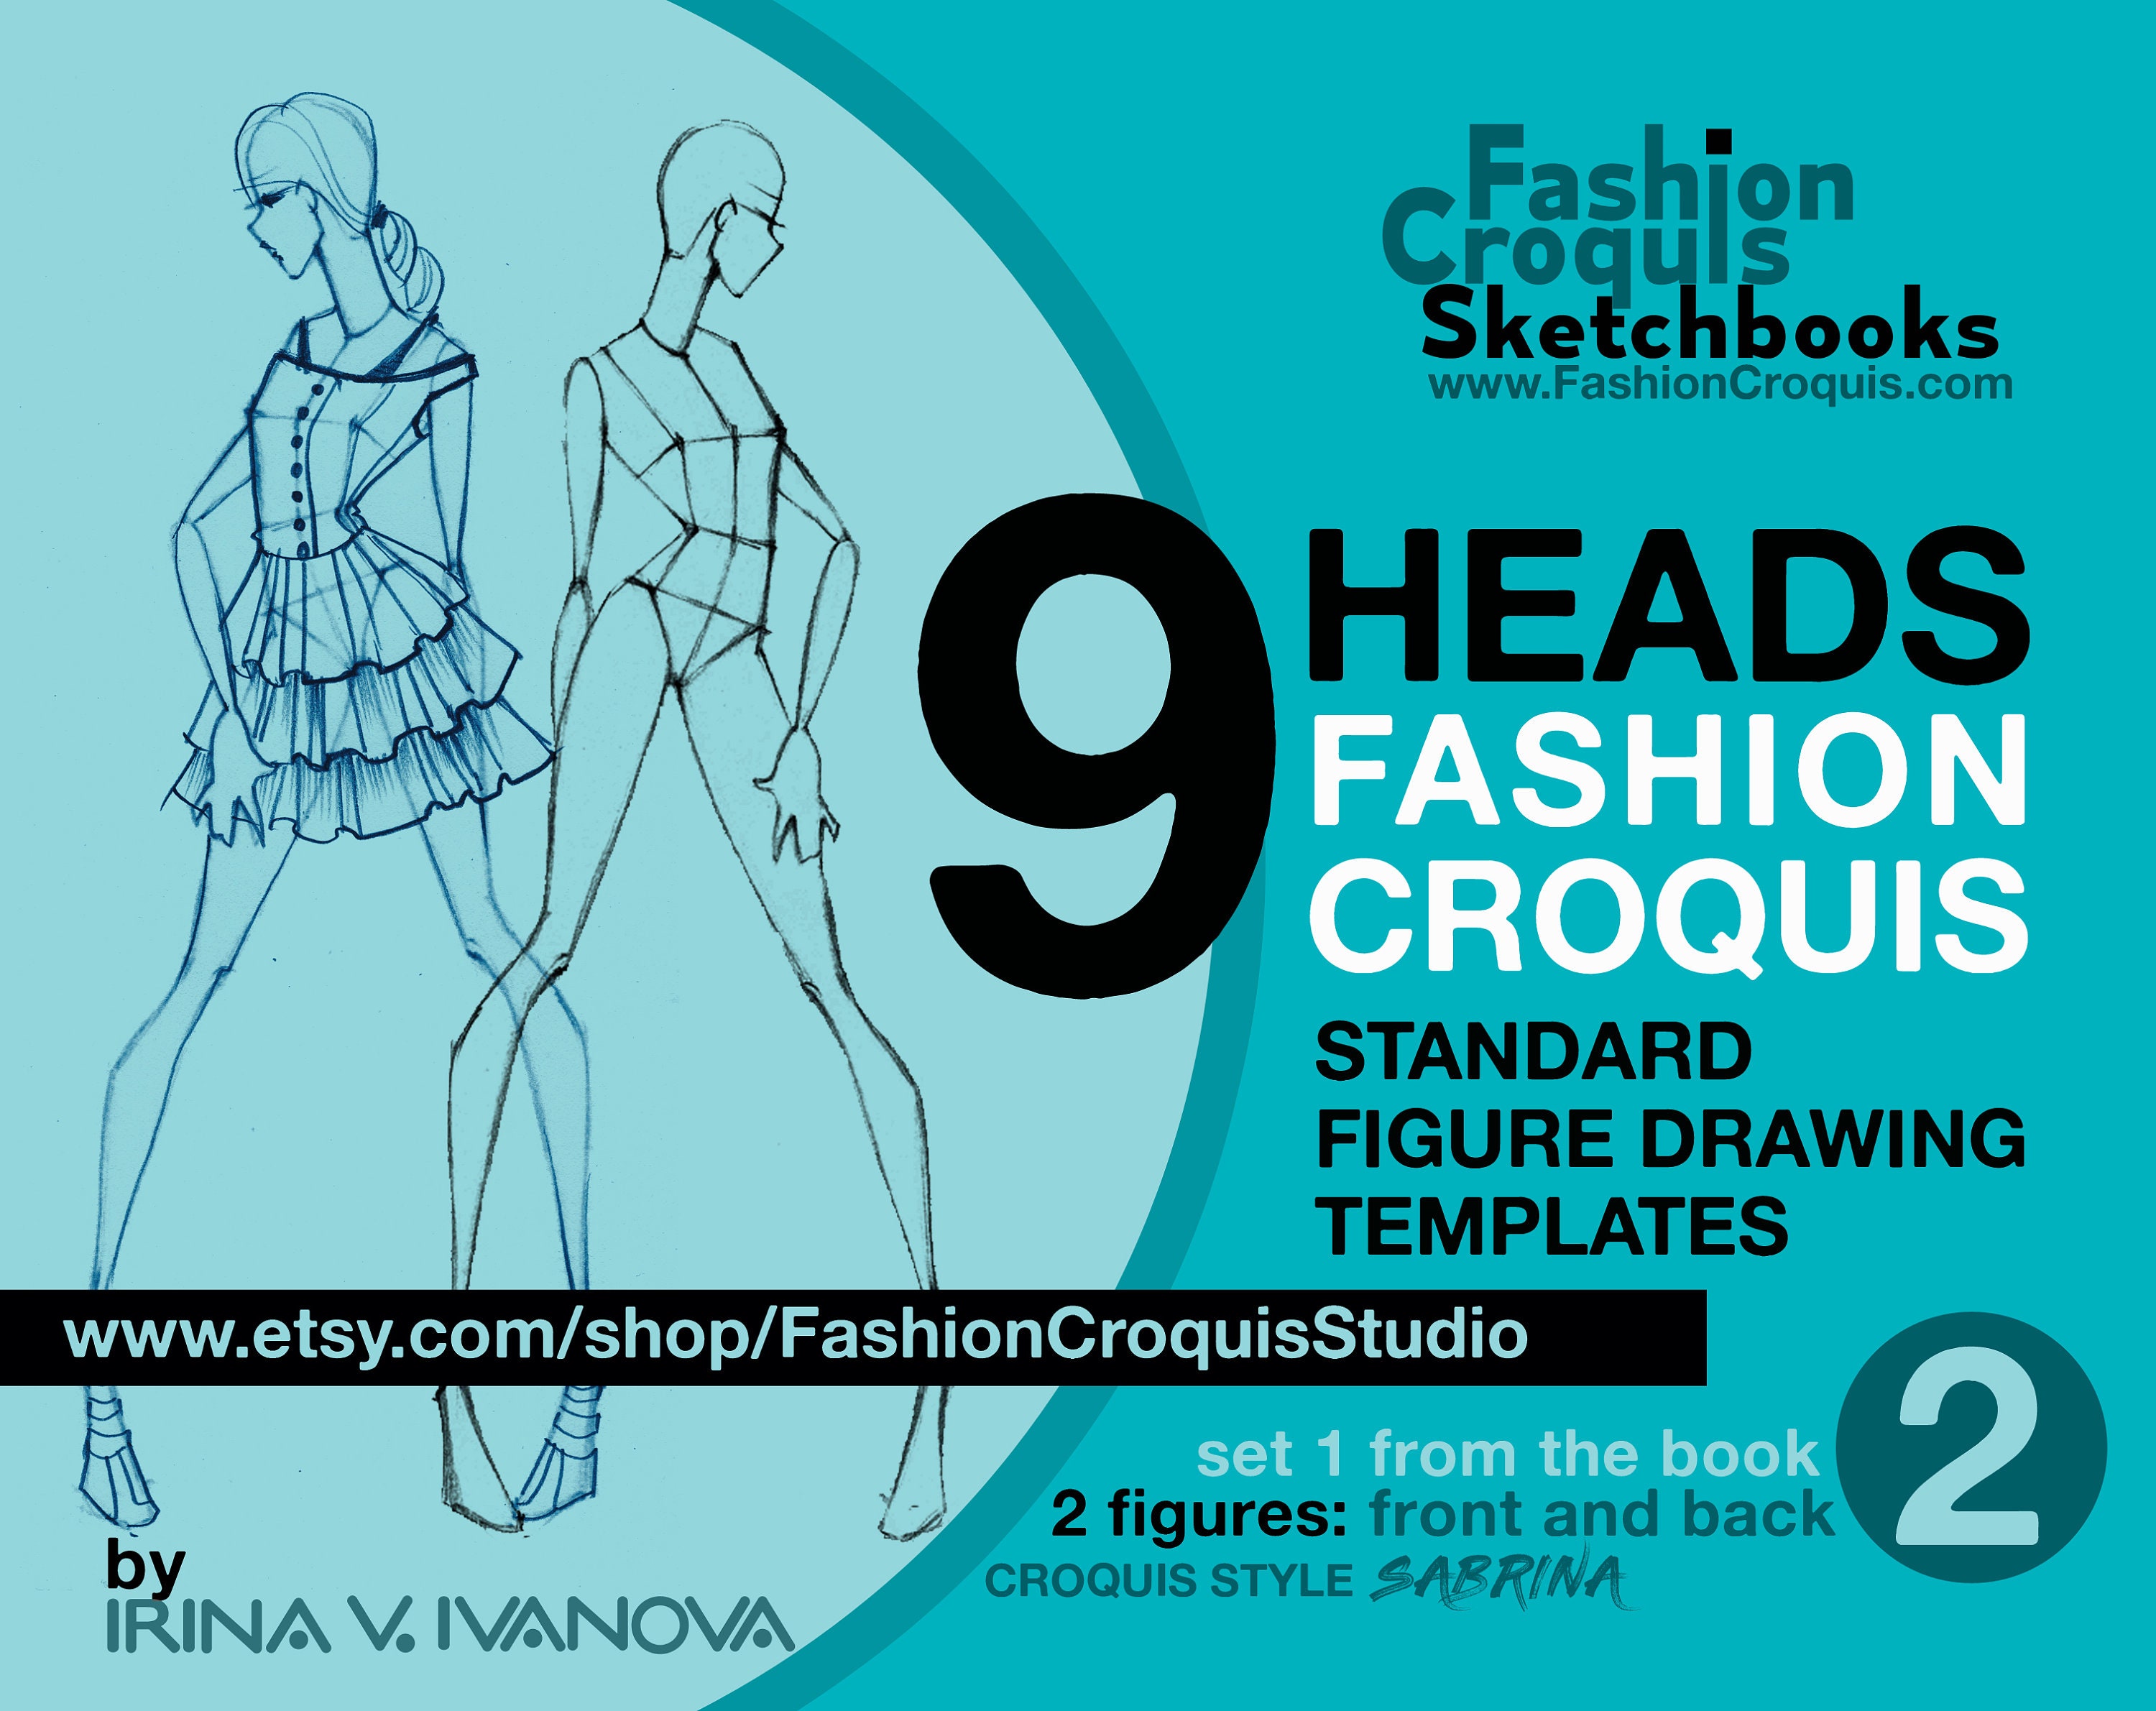 Fashion Sketchbook Figure & Flat Template: Easily Sketching and Building  Your Fashion Design Portfolio with Large Female Croquis & Drawing Your  Fashio (Paperback)